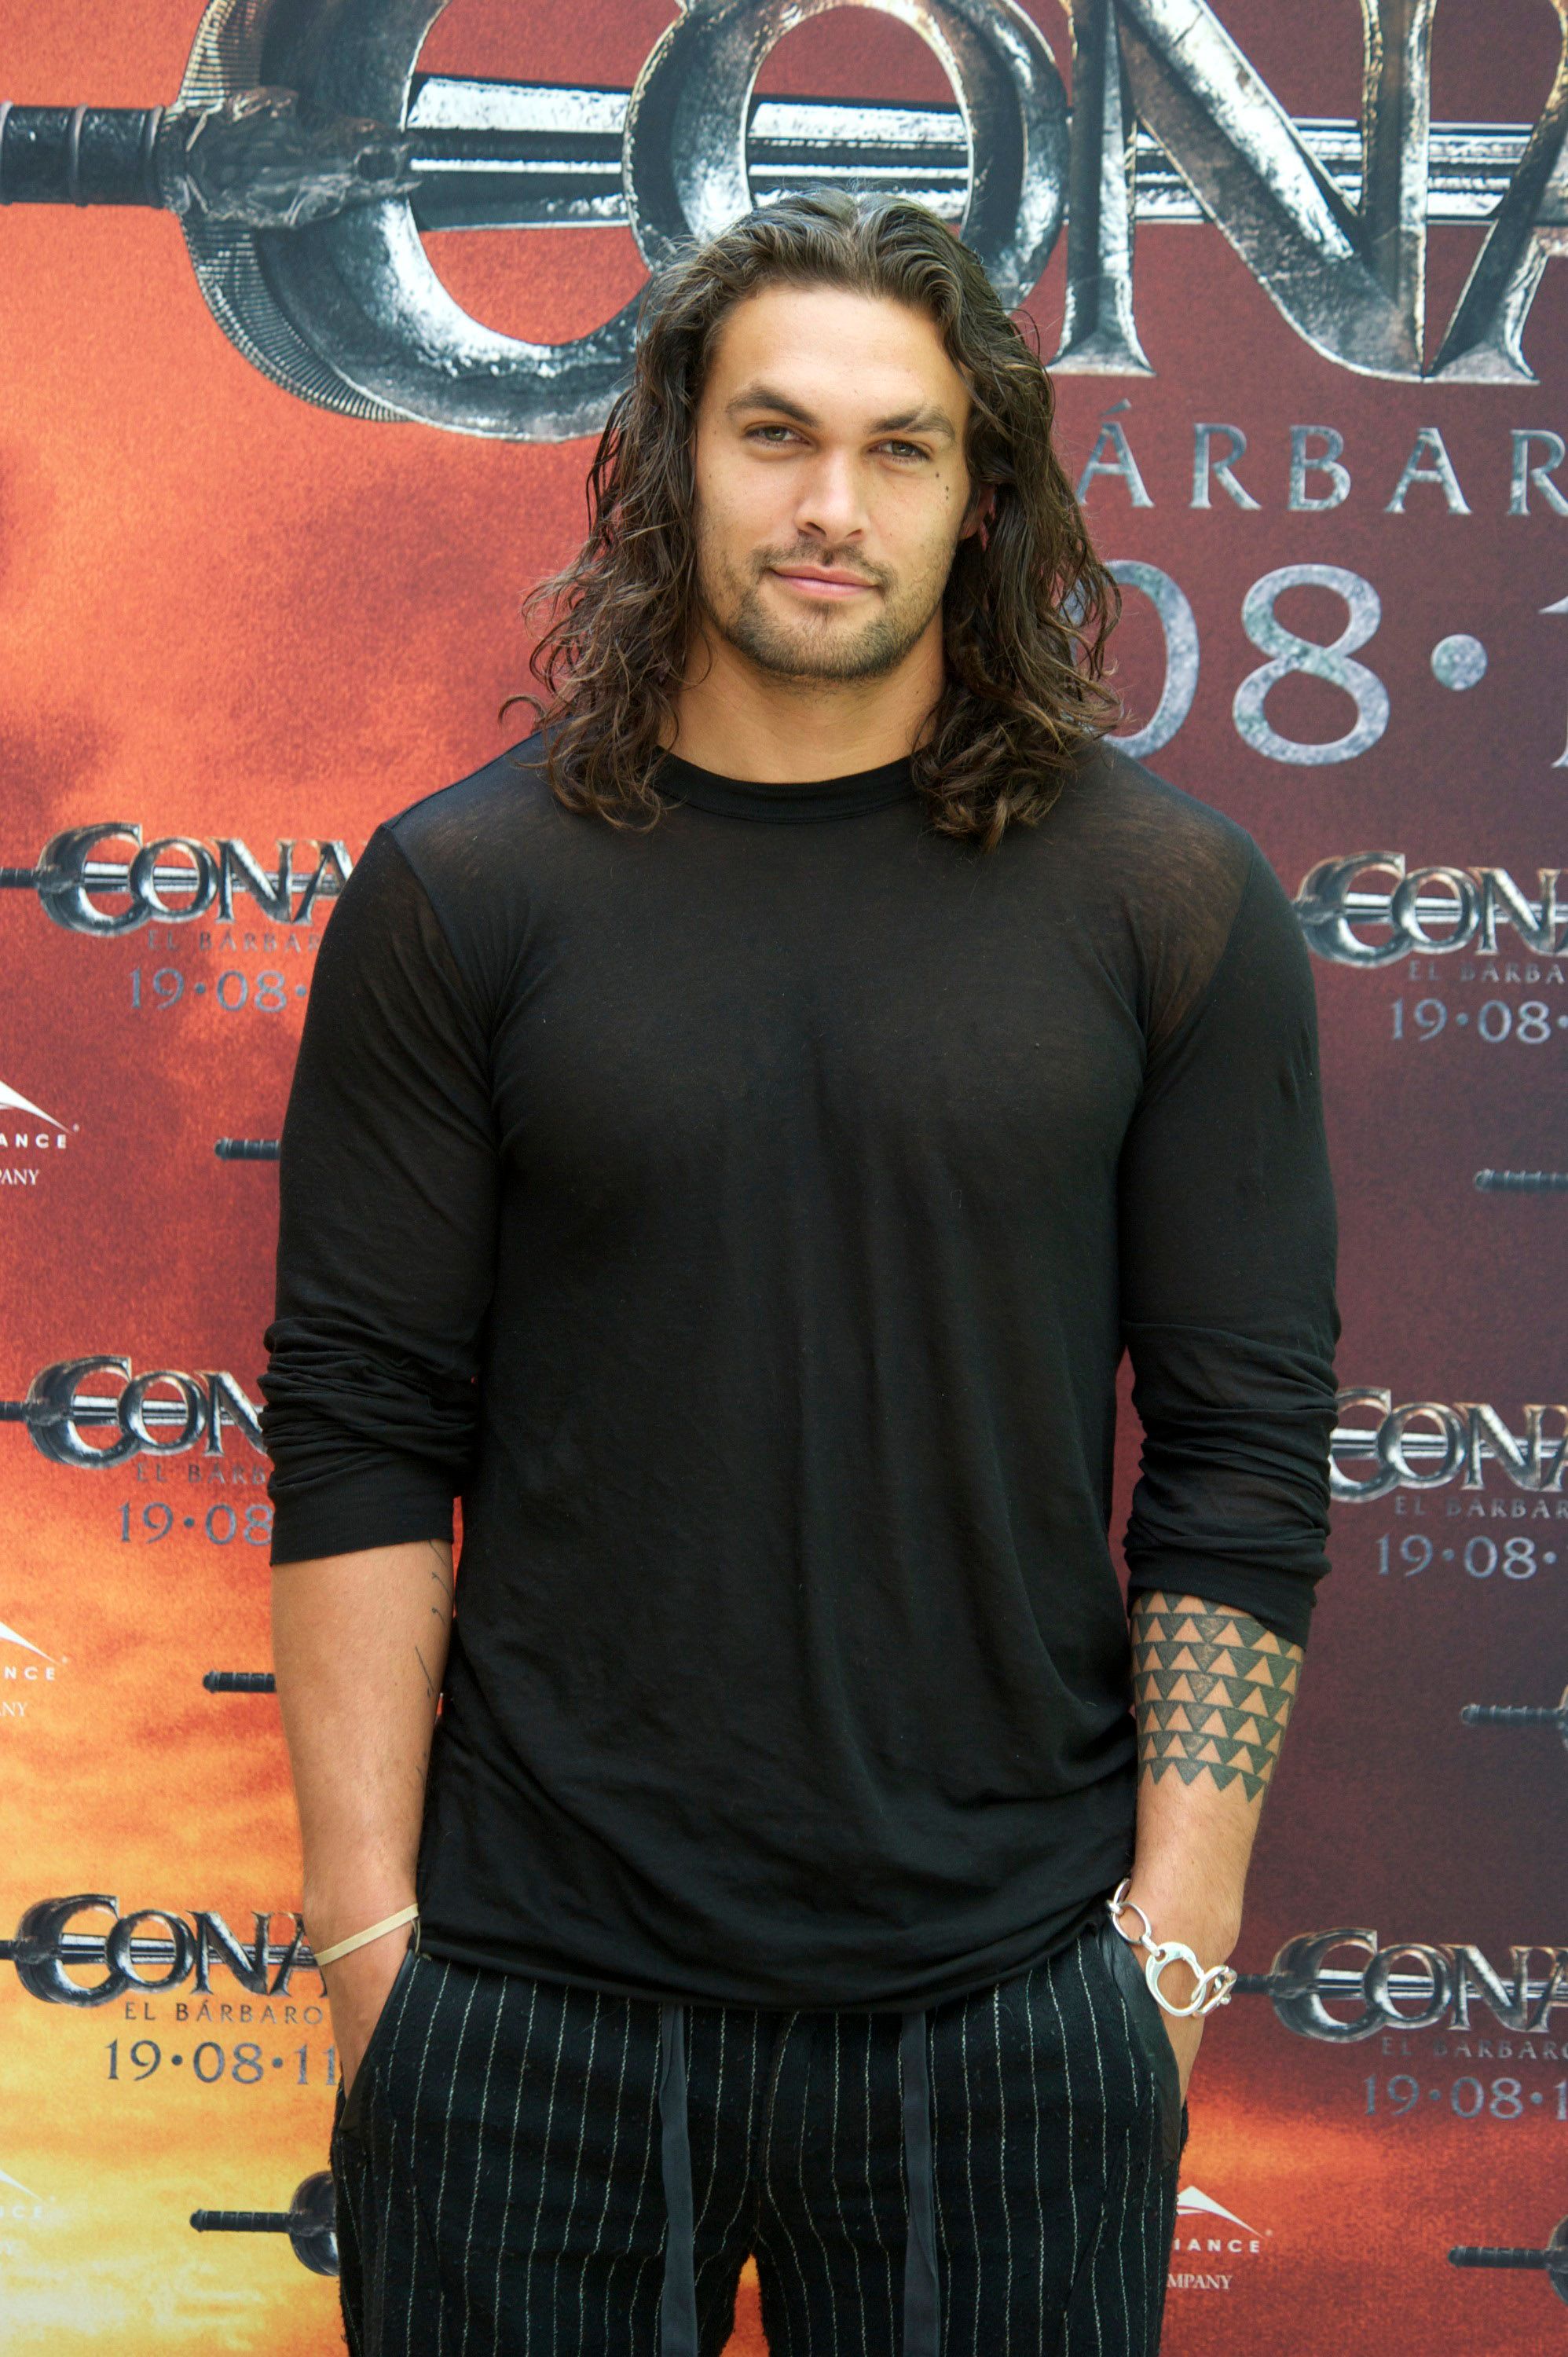 Jason Momoa during the "Conan The Barbarian" photocall at the Villamagna Hotel on July 18, 2011, in Madrid, Spain. | Source: Getty Images